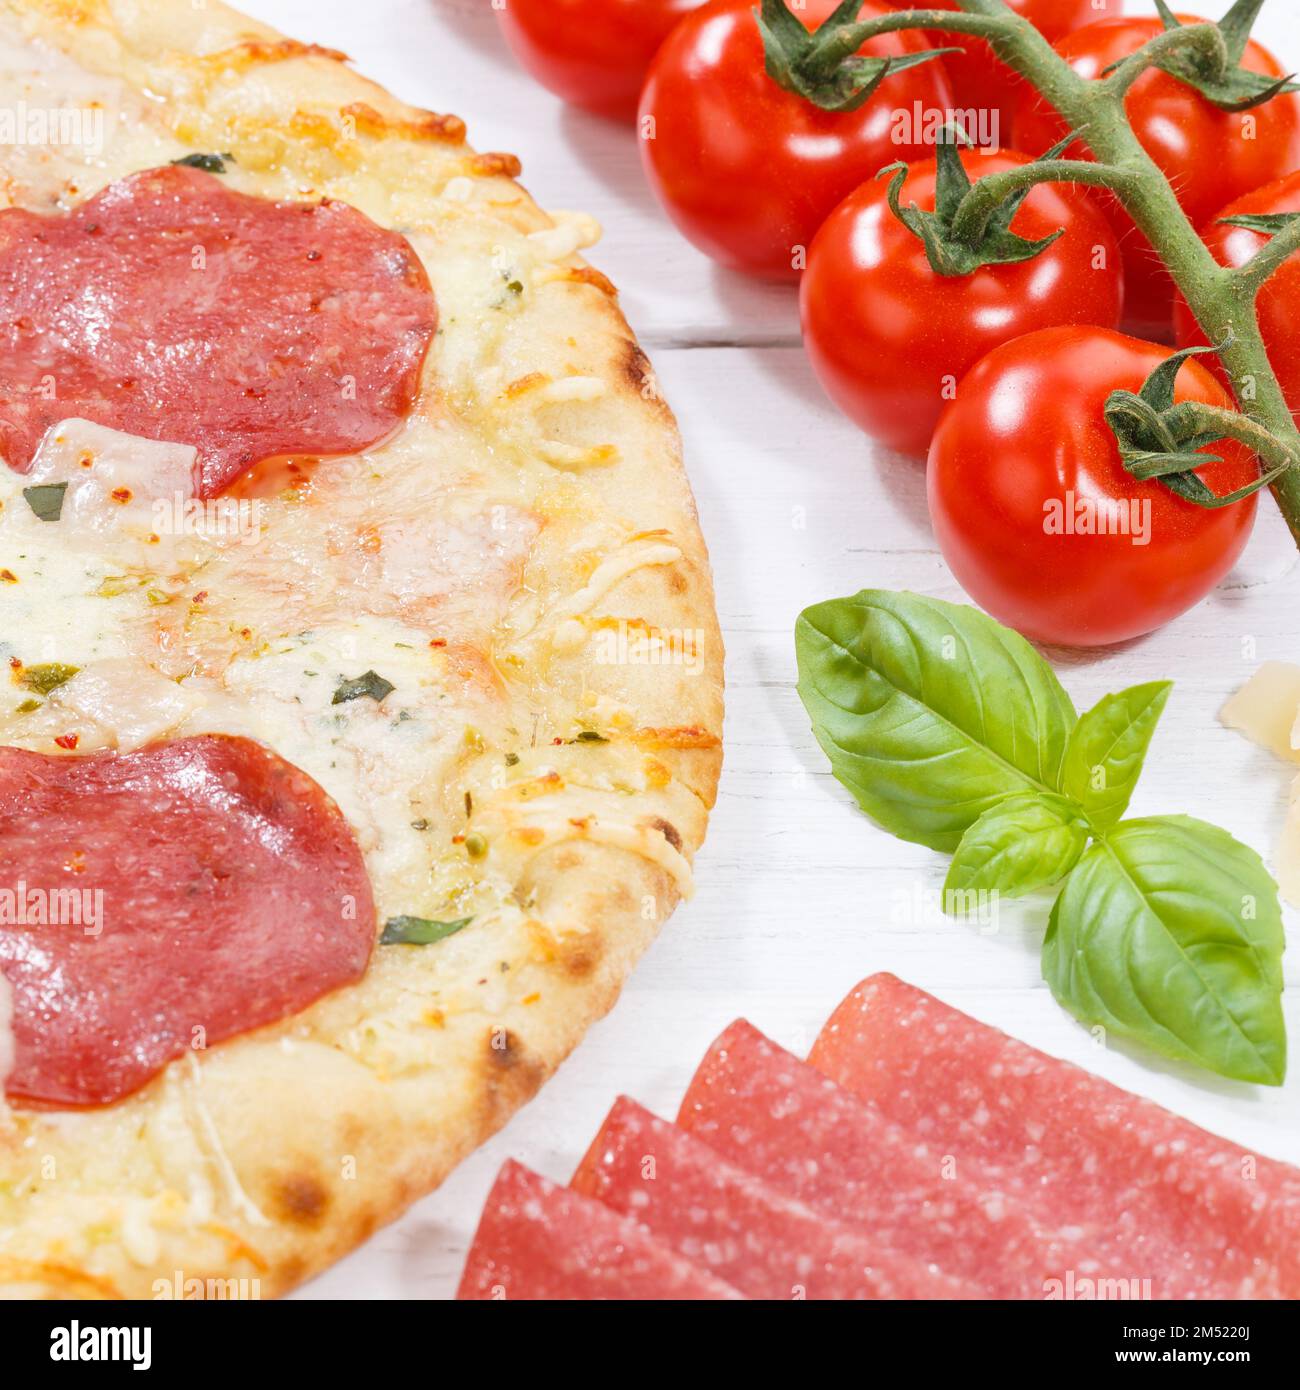 Pizza salami baking ingredients square on wooden board wood Stock Photo